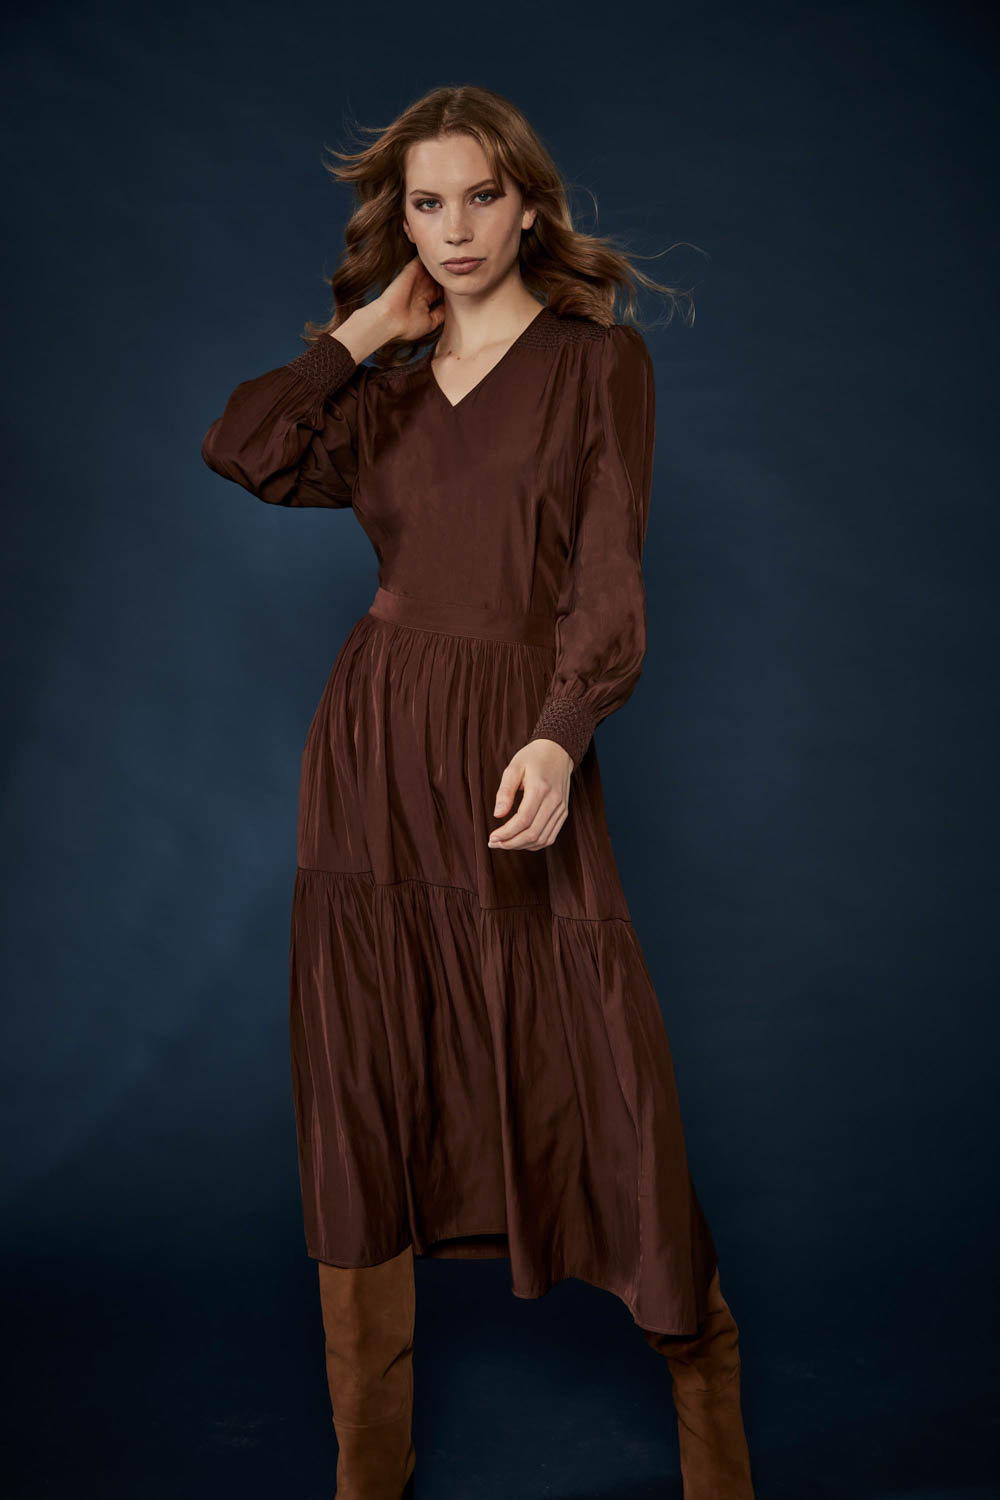 Glide by Verge - Tangled Blouse - Chocolate - Blouse VERGE